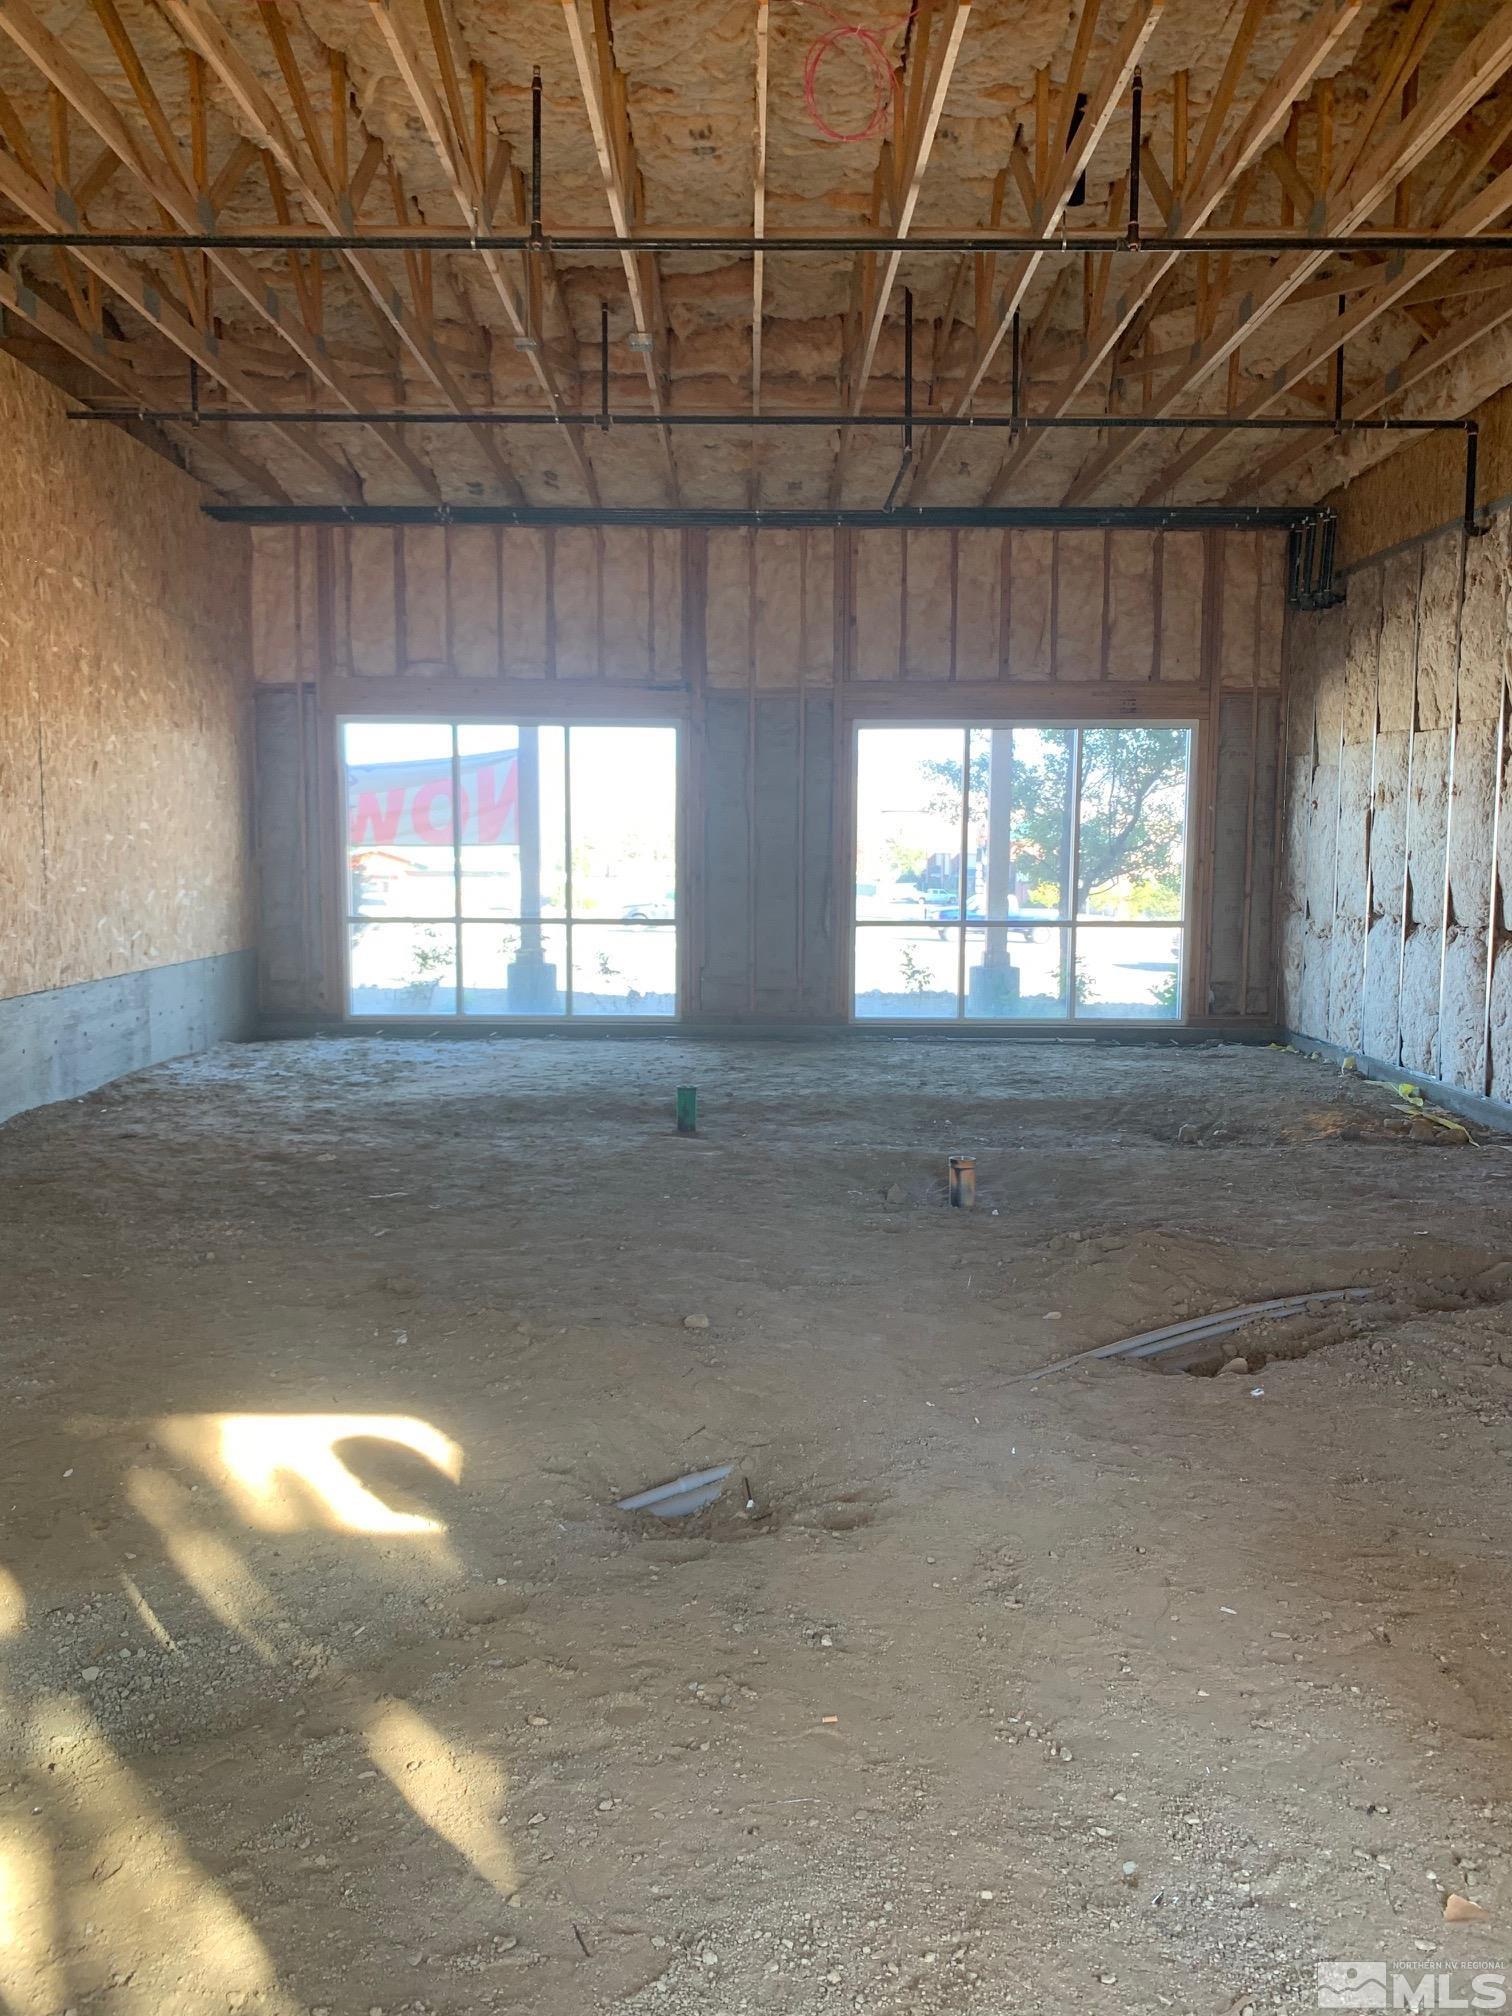 a view of an empty room with windows